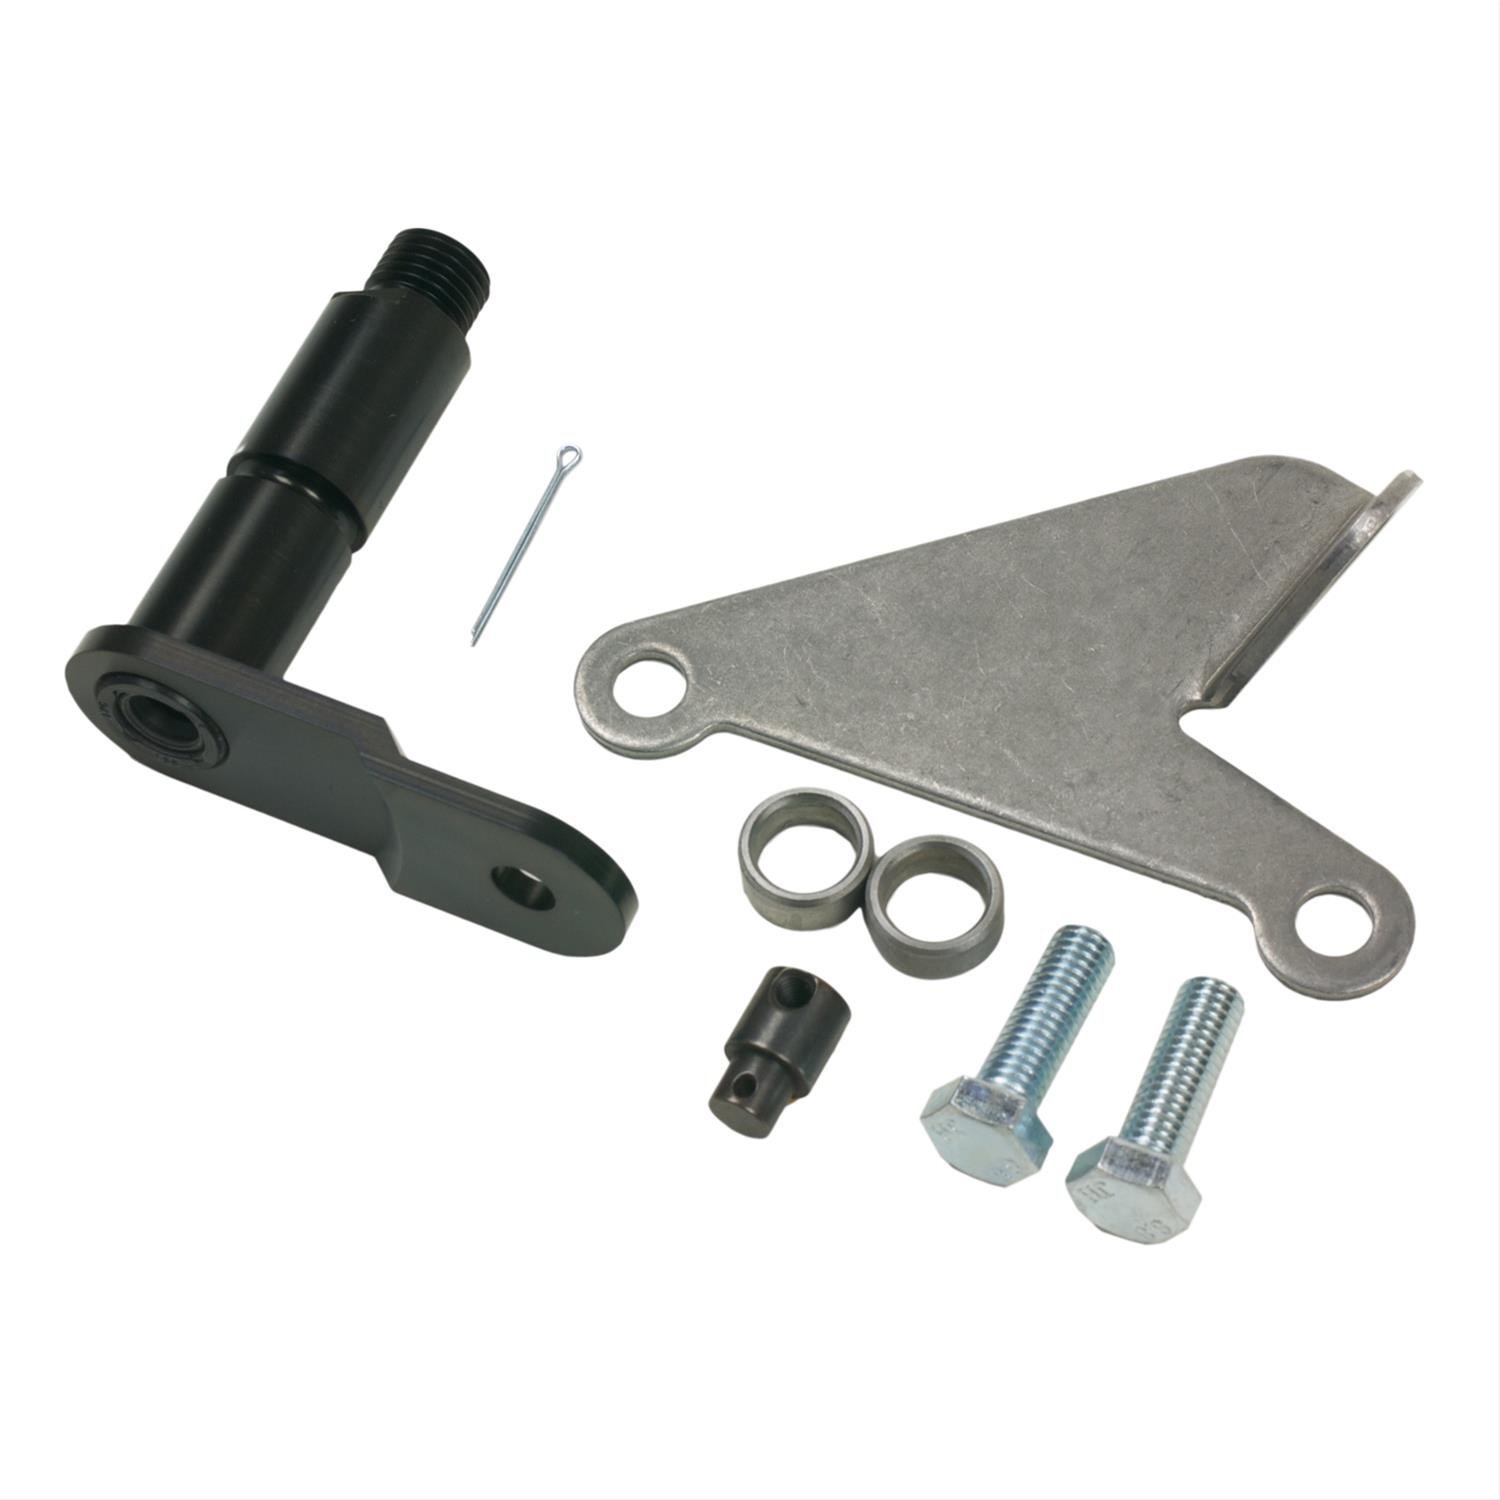 Replacement Shifter Bracket and Lever Kit Ford AOD